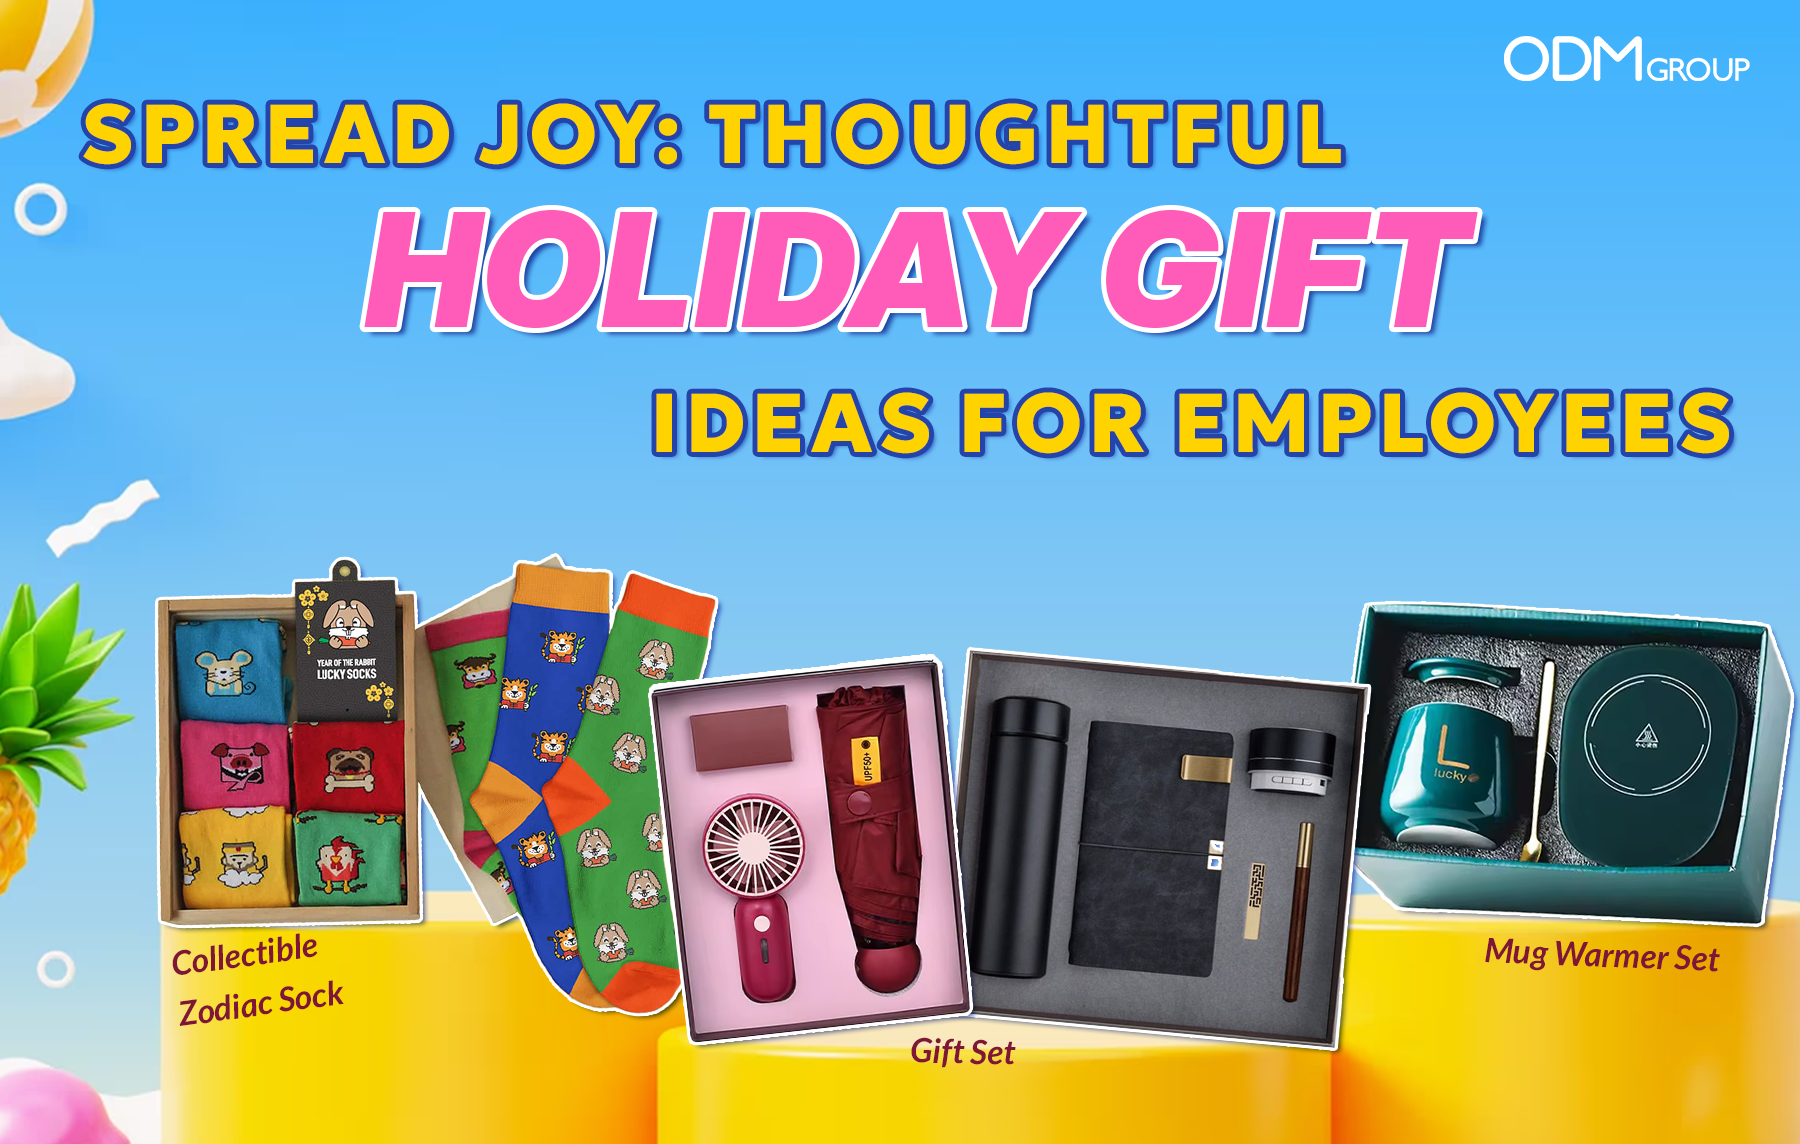 Holiday gift ideas for employees featuring zodiac socks, gift sets, and a mug warmer set from The ODM Group.